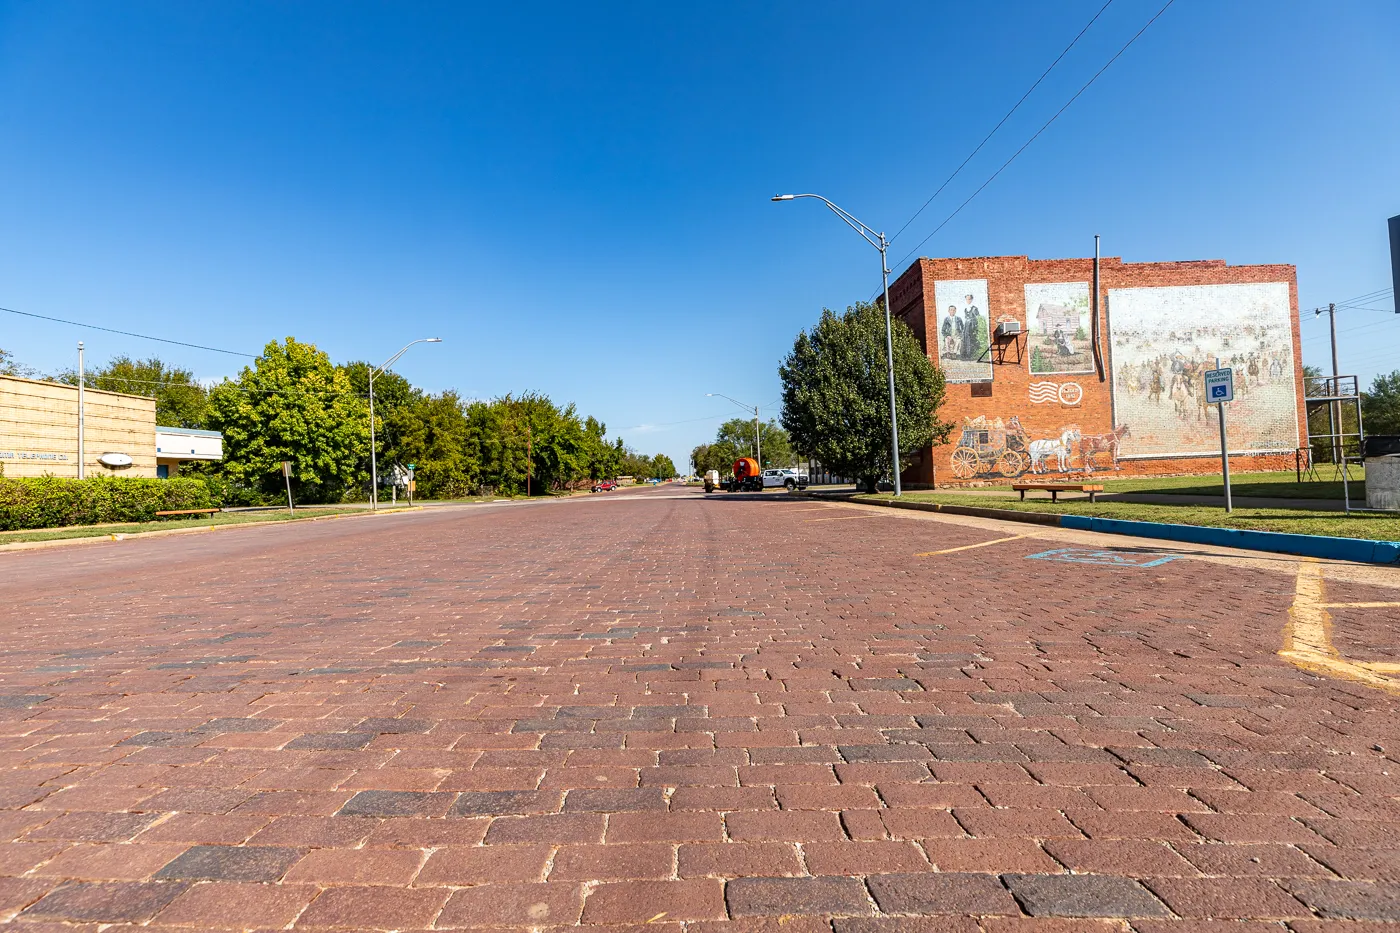 Route 66 Brick Paved Broadway Street in Davenport, Oklahoma